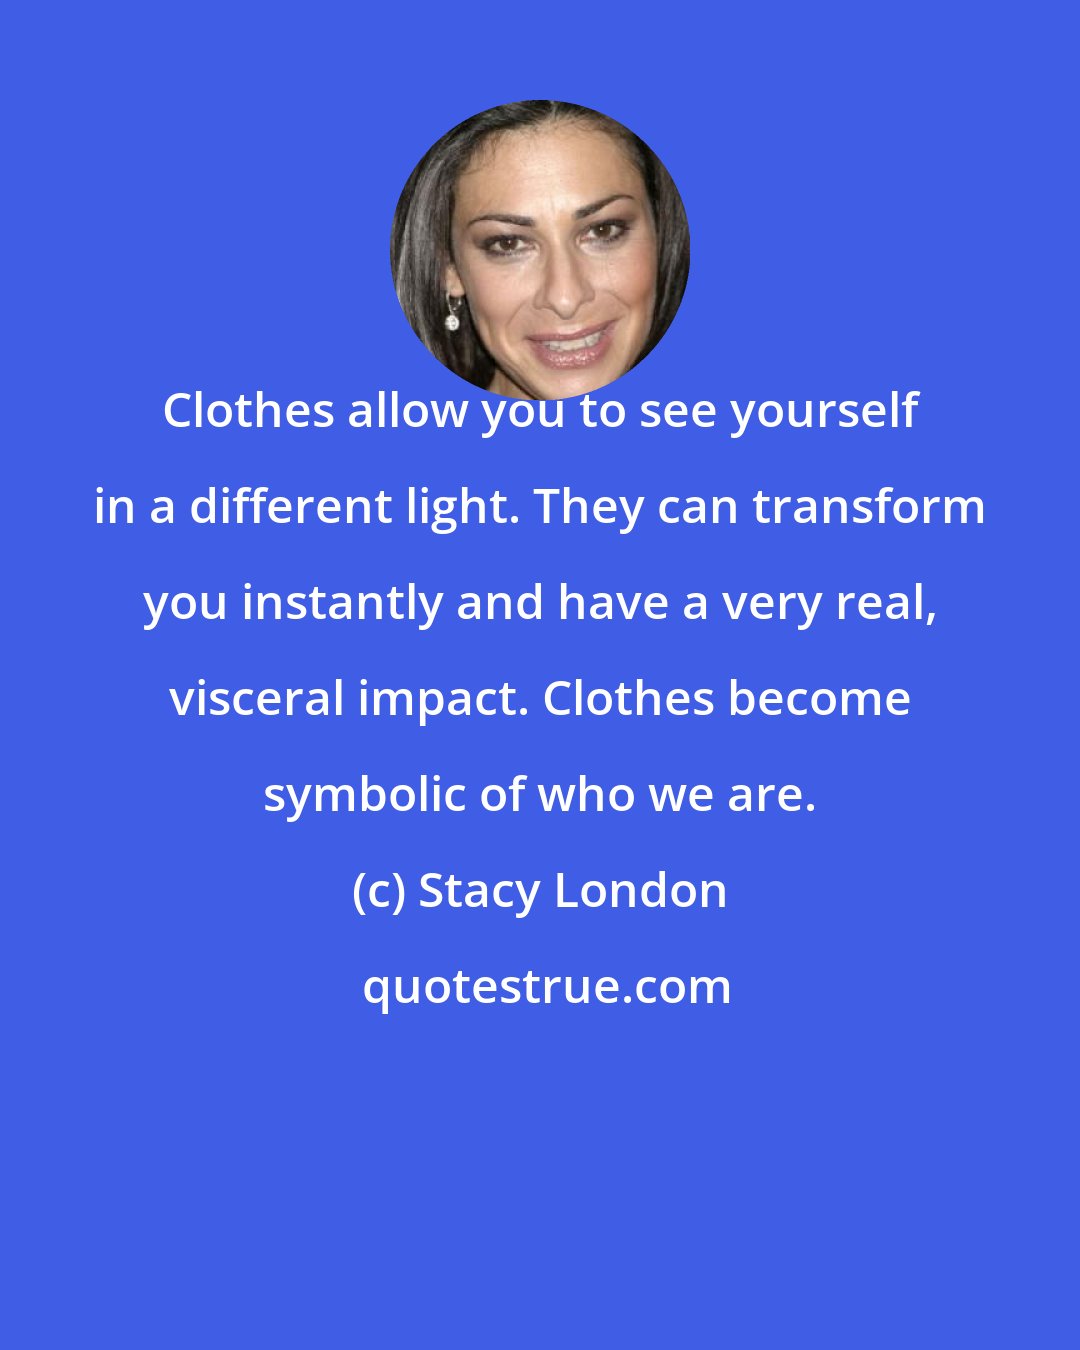 Stacy London: Clothes allow you to see yourself in a different light. They can transform you instantly and have a very real, visceral impact. Clothes become symbolic of who we are.